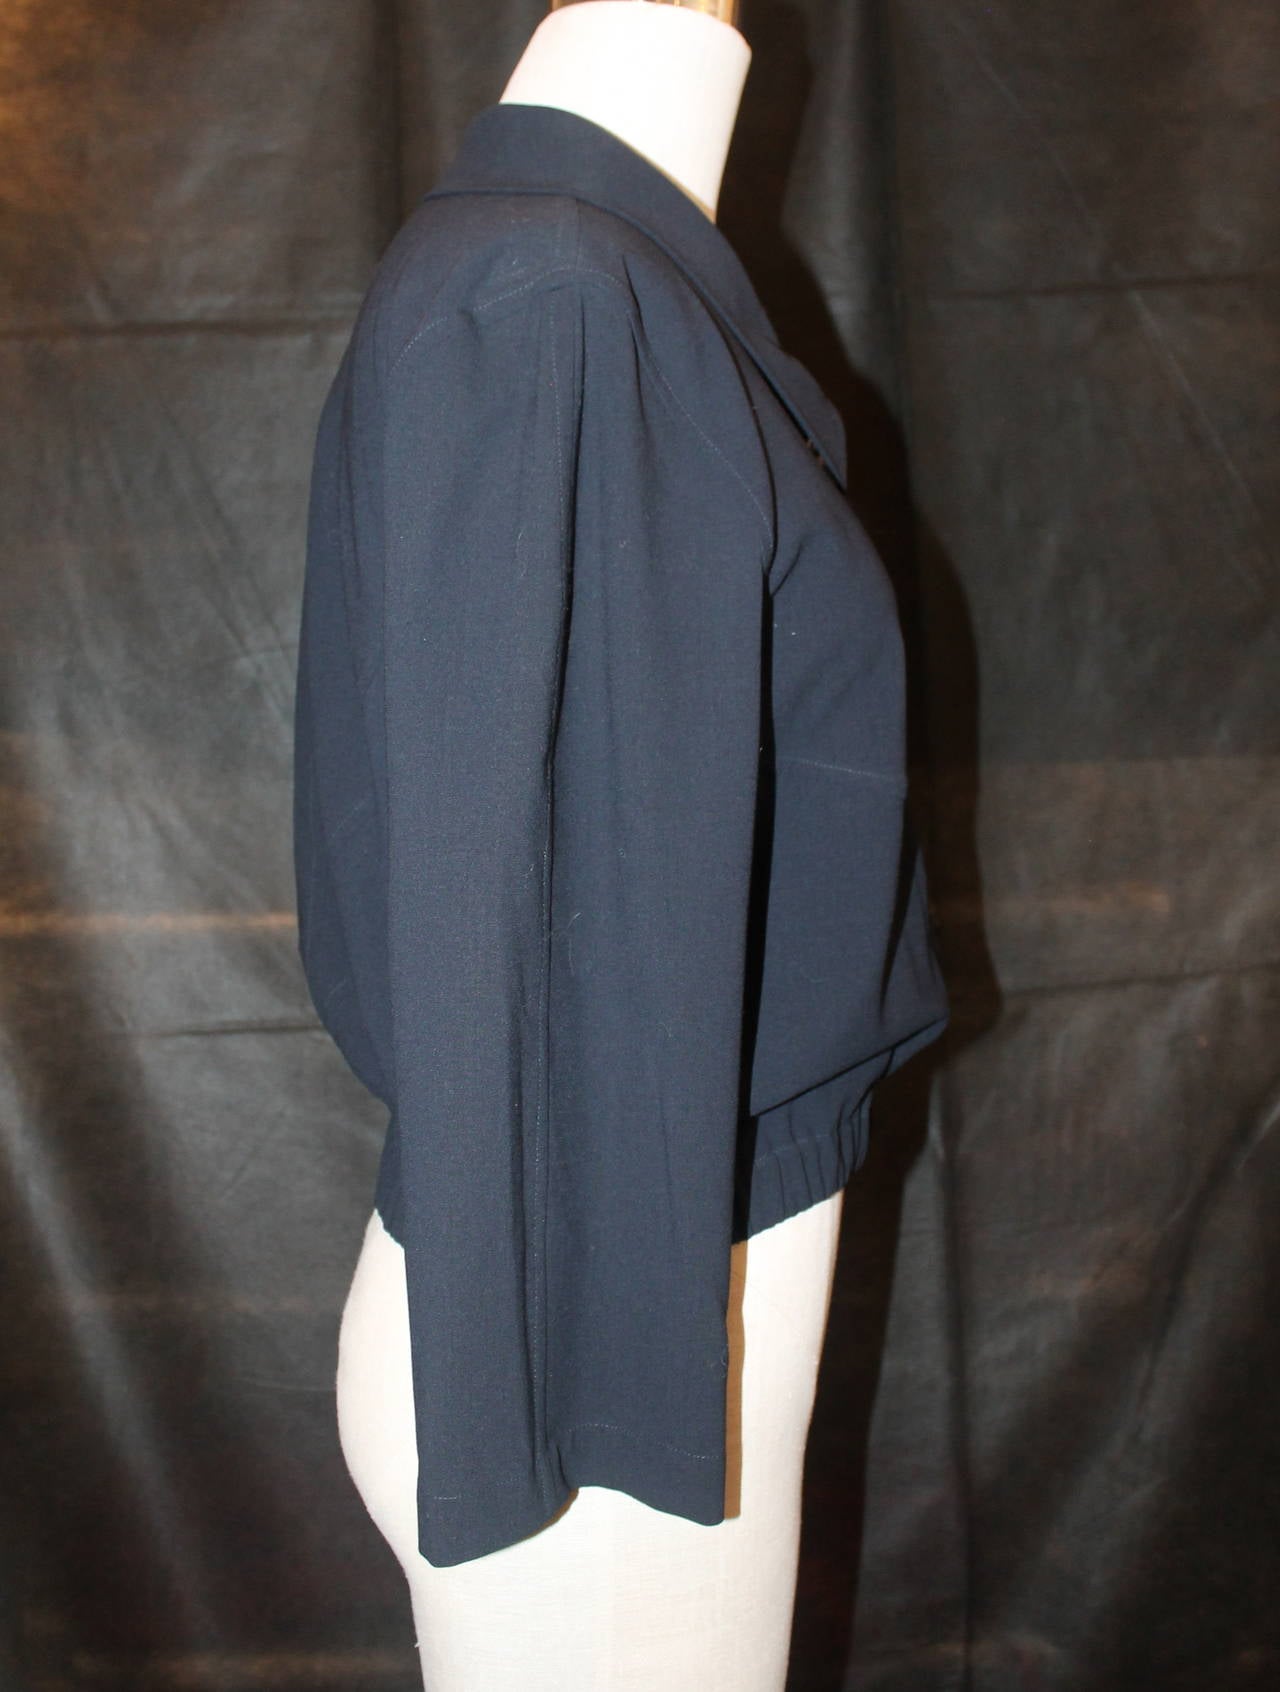 Chanel Navy Wool Jacket/Shirt with Elastic Bottom - 38. This shirt is in good condition with minor wear. There is a matching maxi skirt in stock. 

Measurements:
Bust- 38